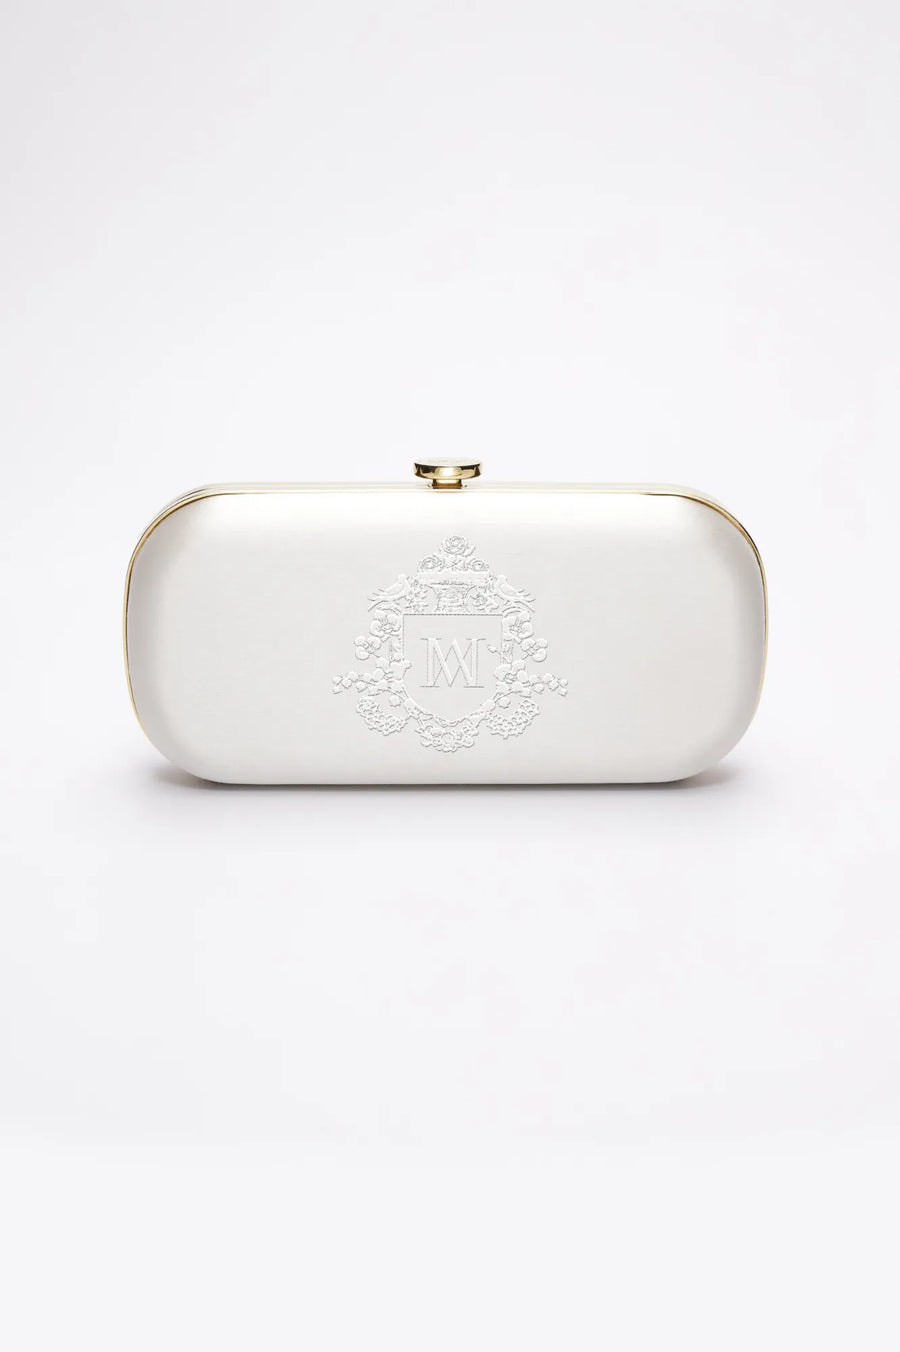 Front view of ivory satin Bella bridal clutch with gold hardware and white bridal monogram embroidery.